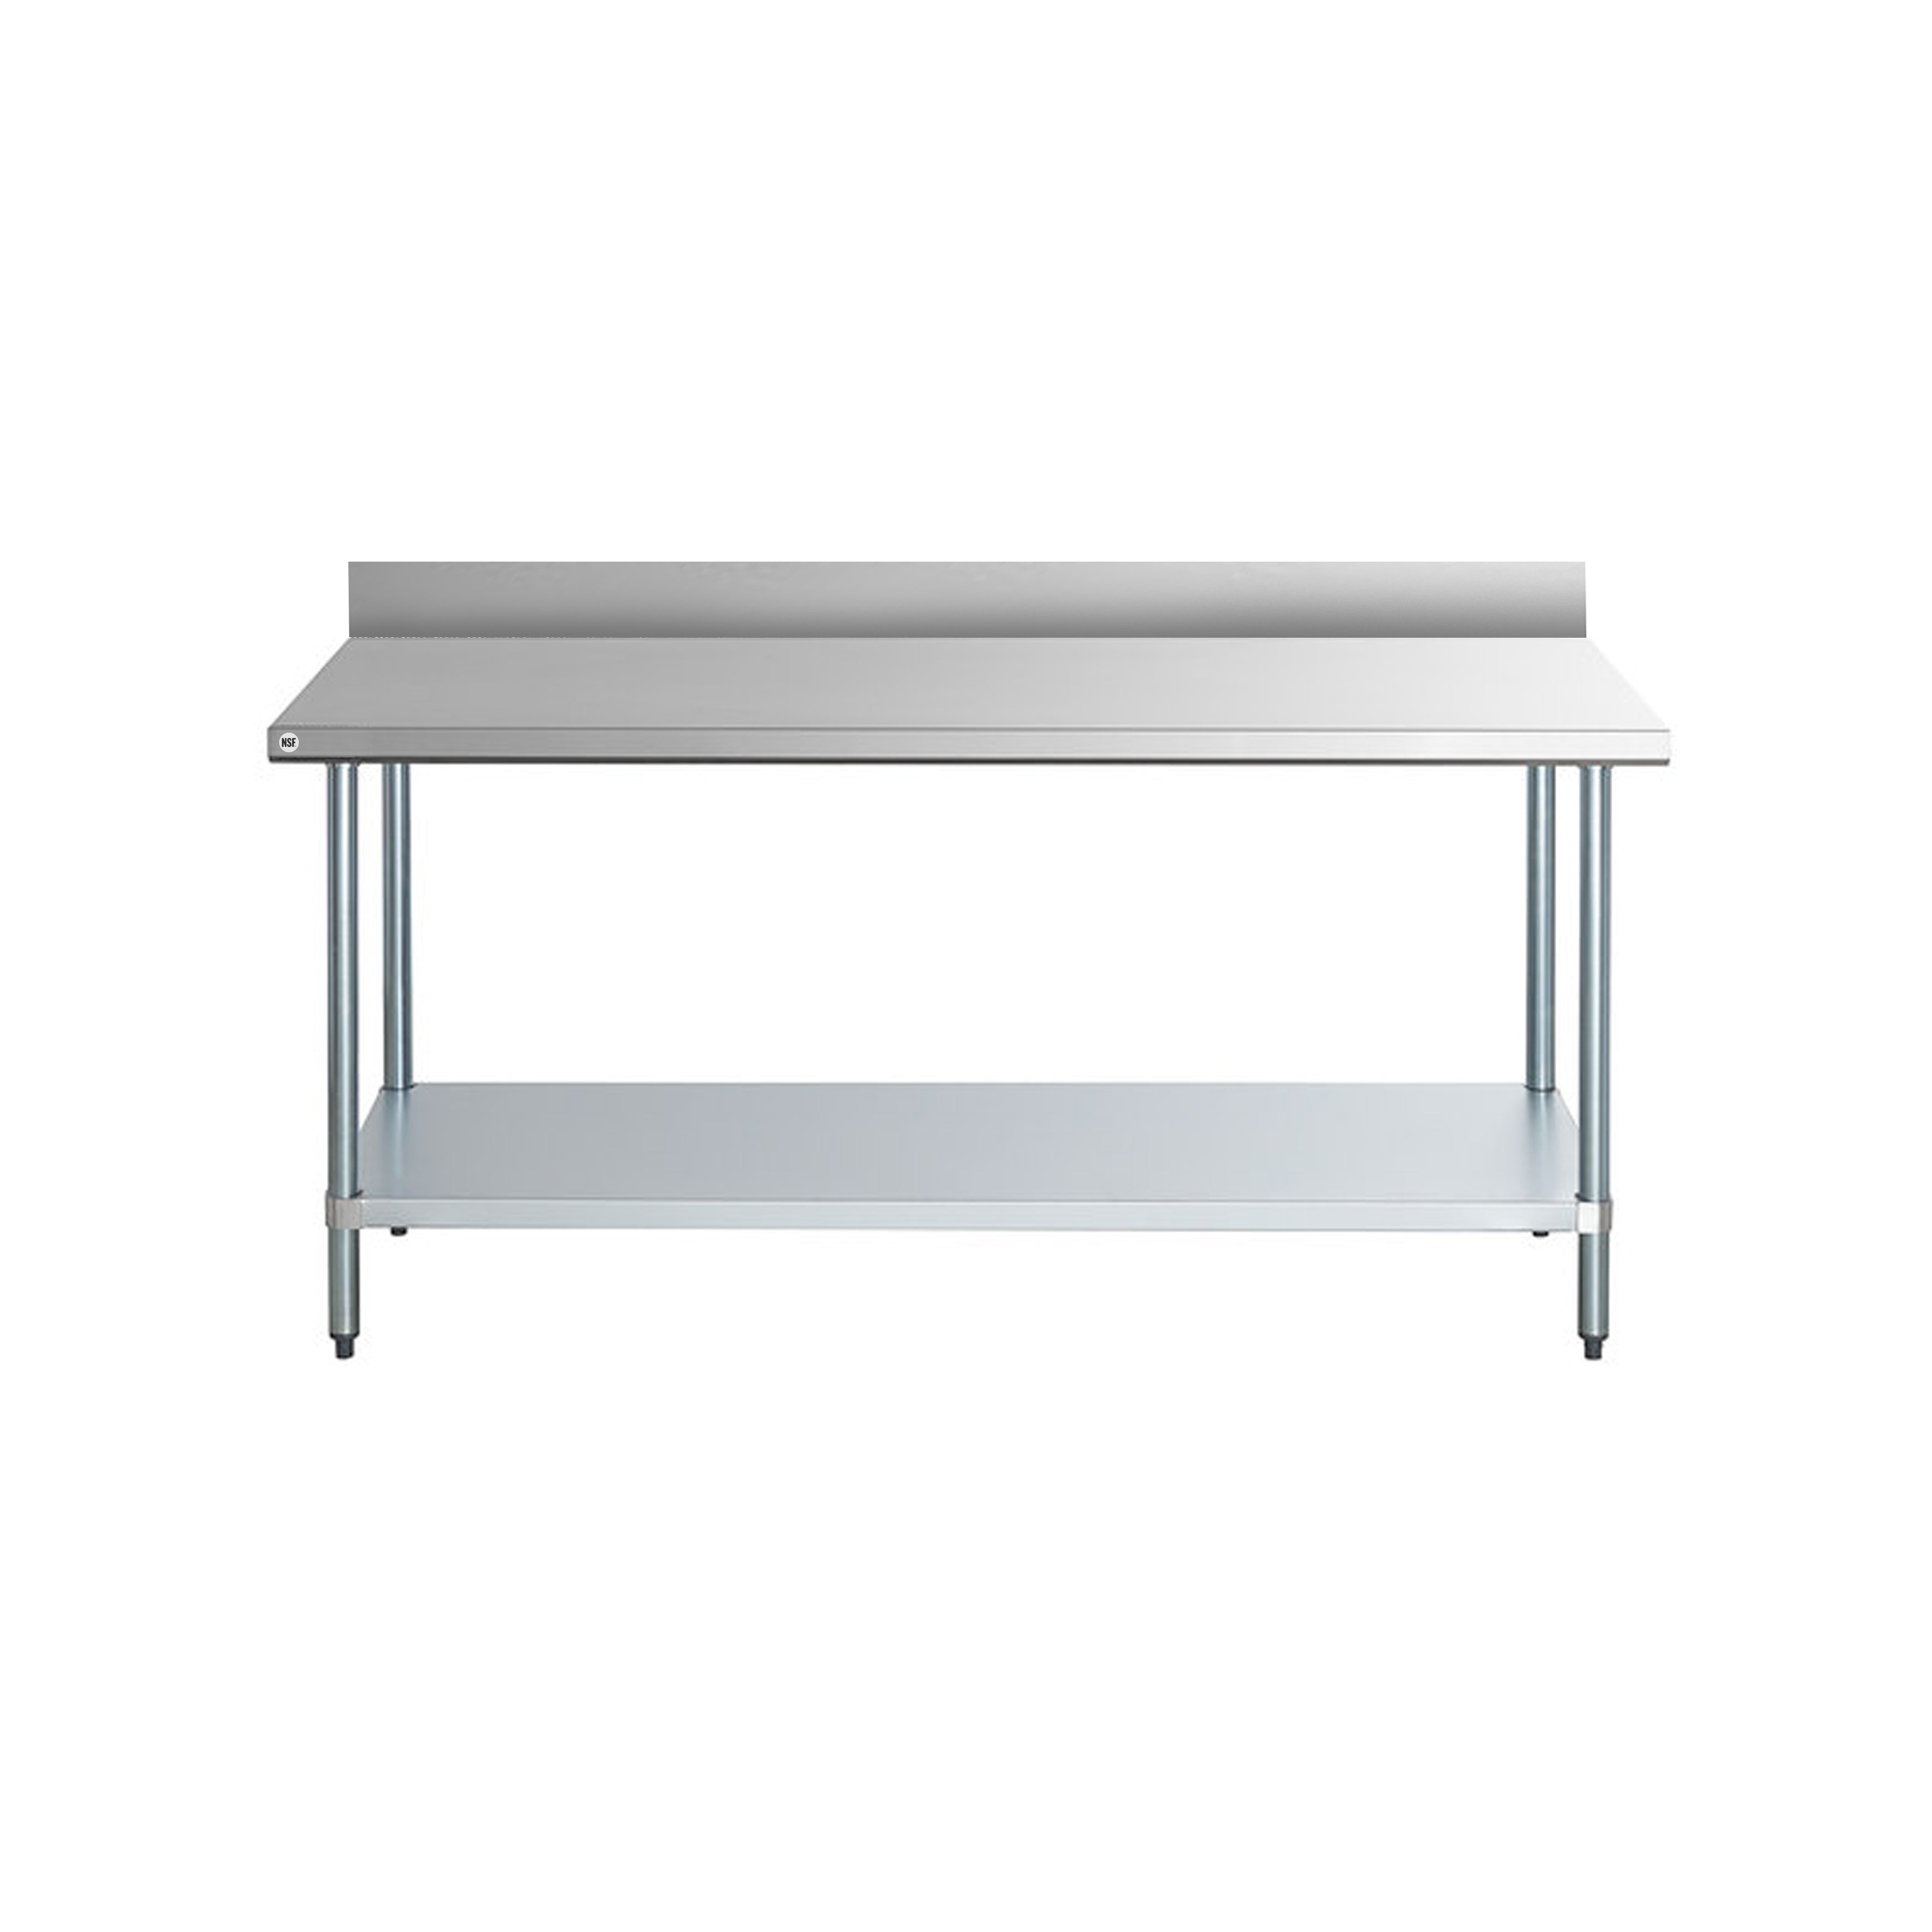 Omcan - 22078, Commercial 24" x 24" Stainless Steel Kitchen Work Table with 4" BackSplash 700lbs Light Duty